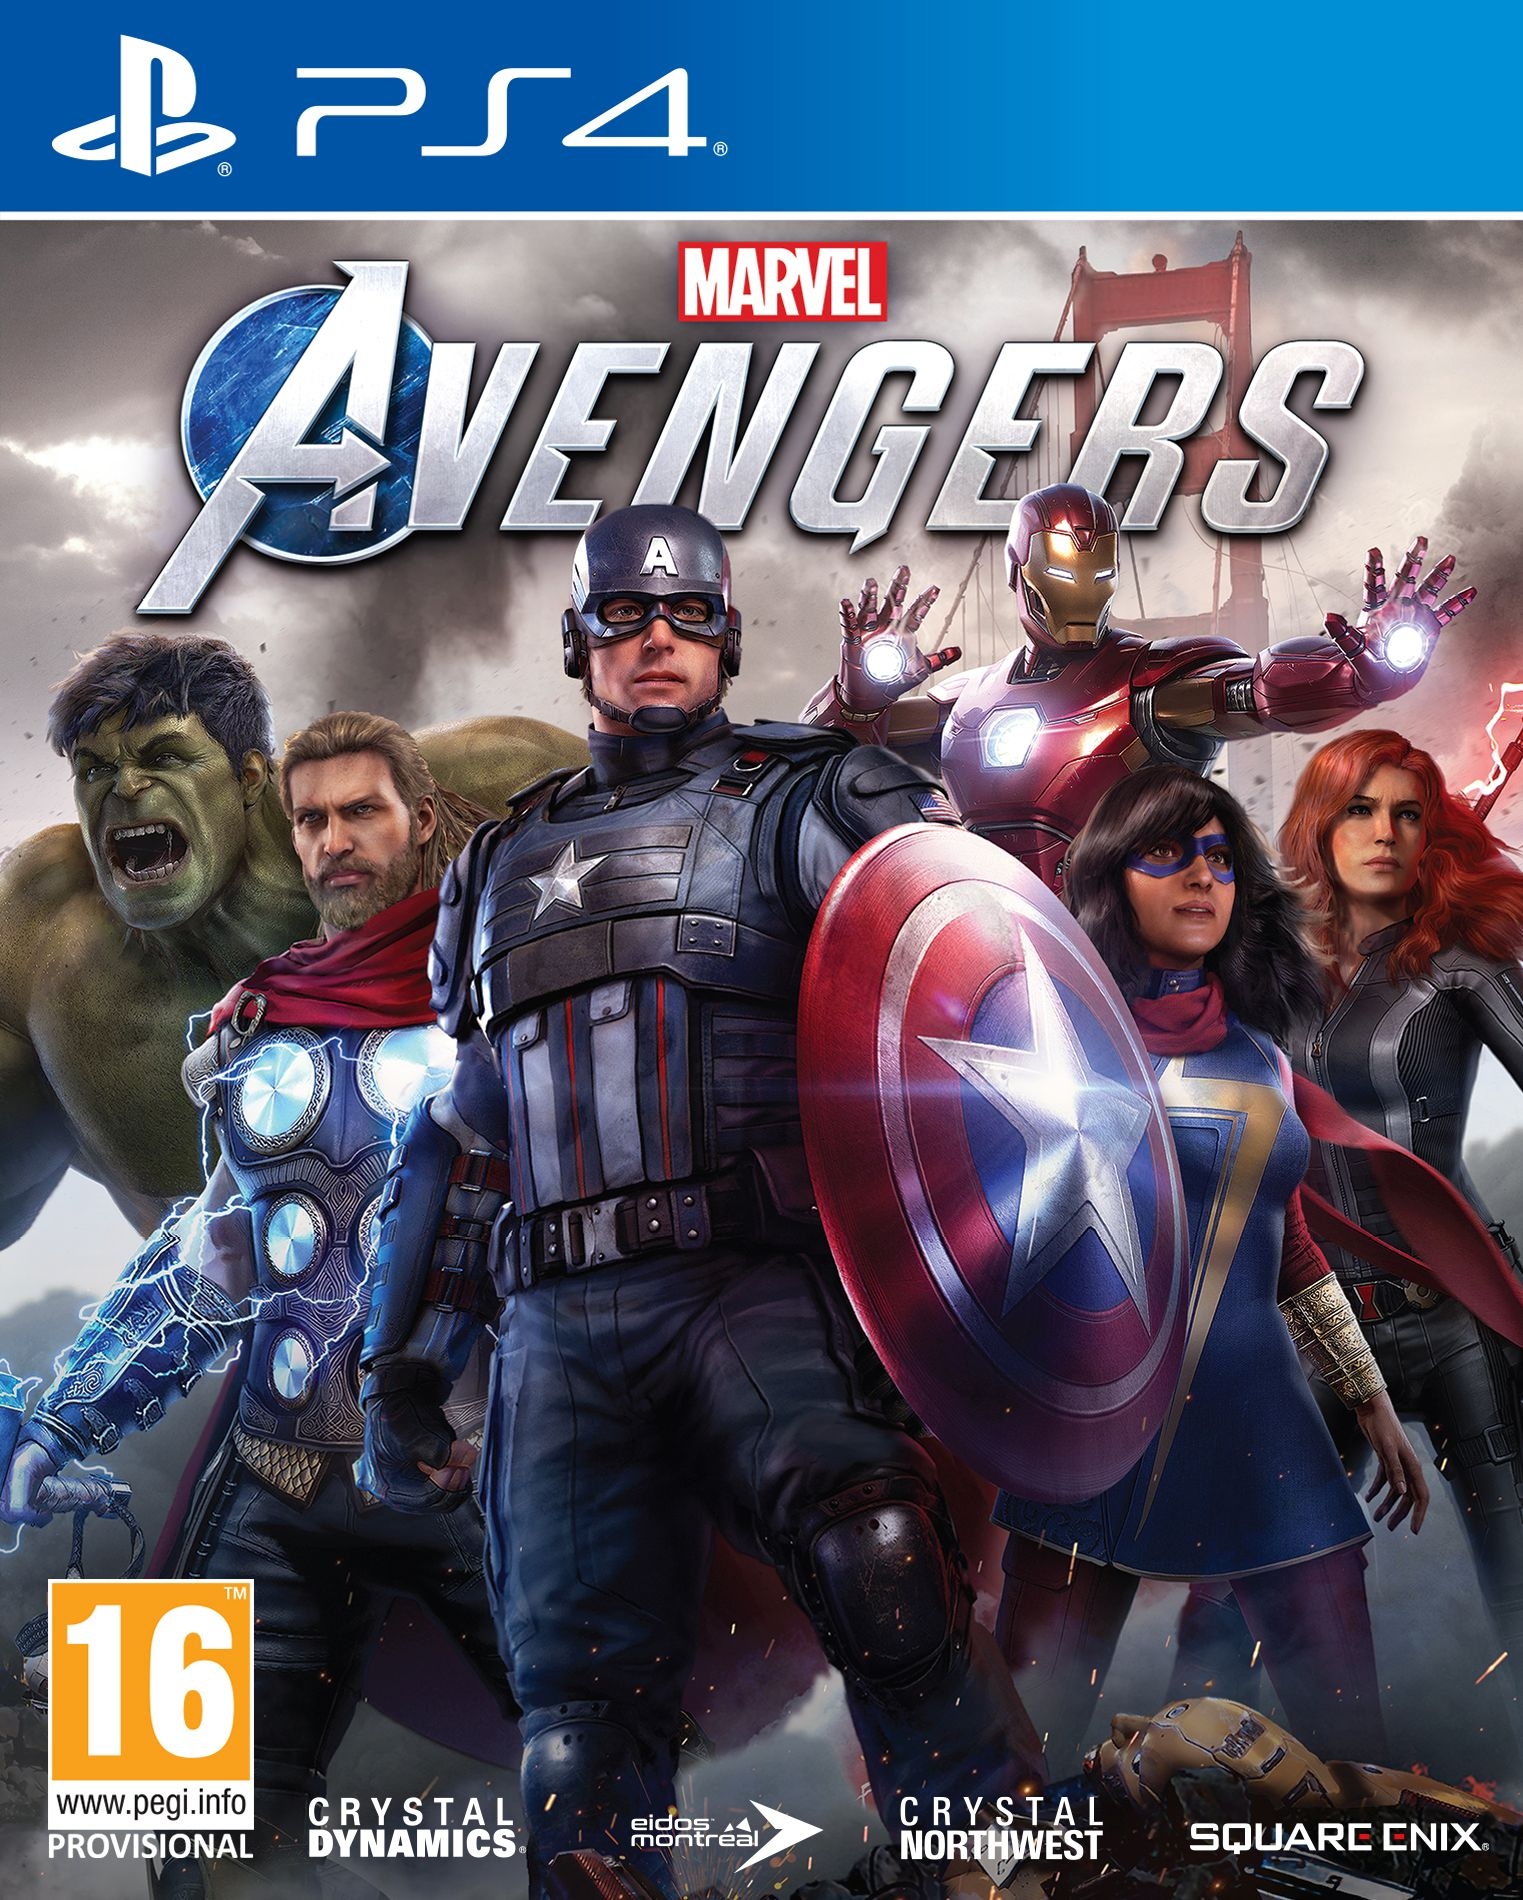 PS4 Marvel´s Avengers Earth's Mightiest Edition